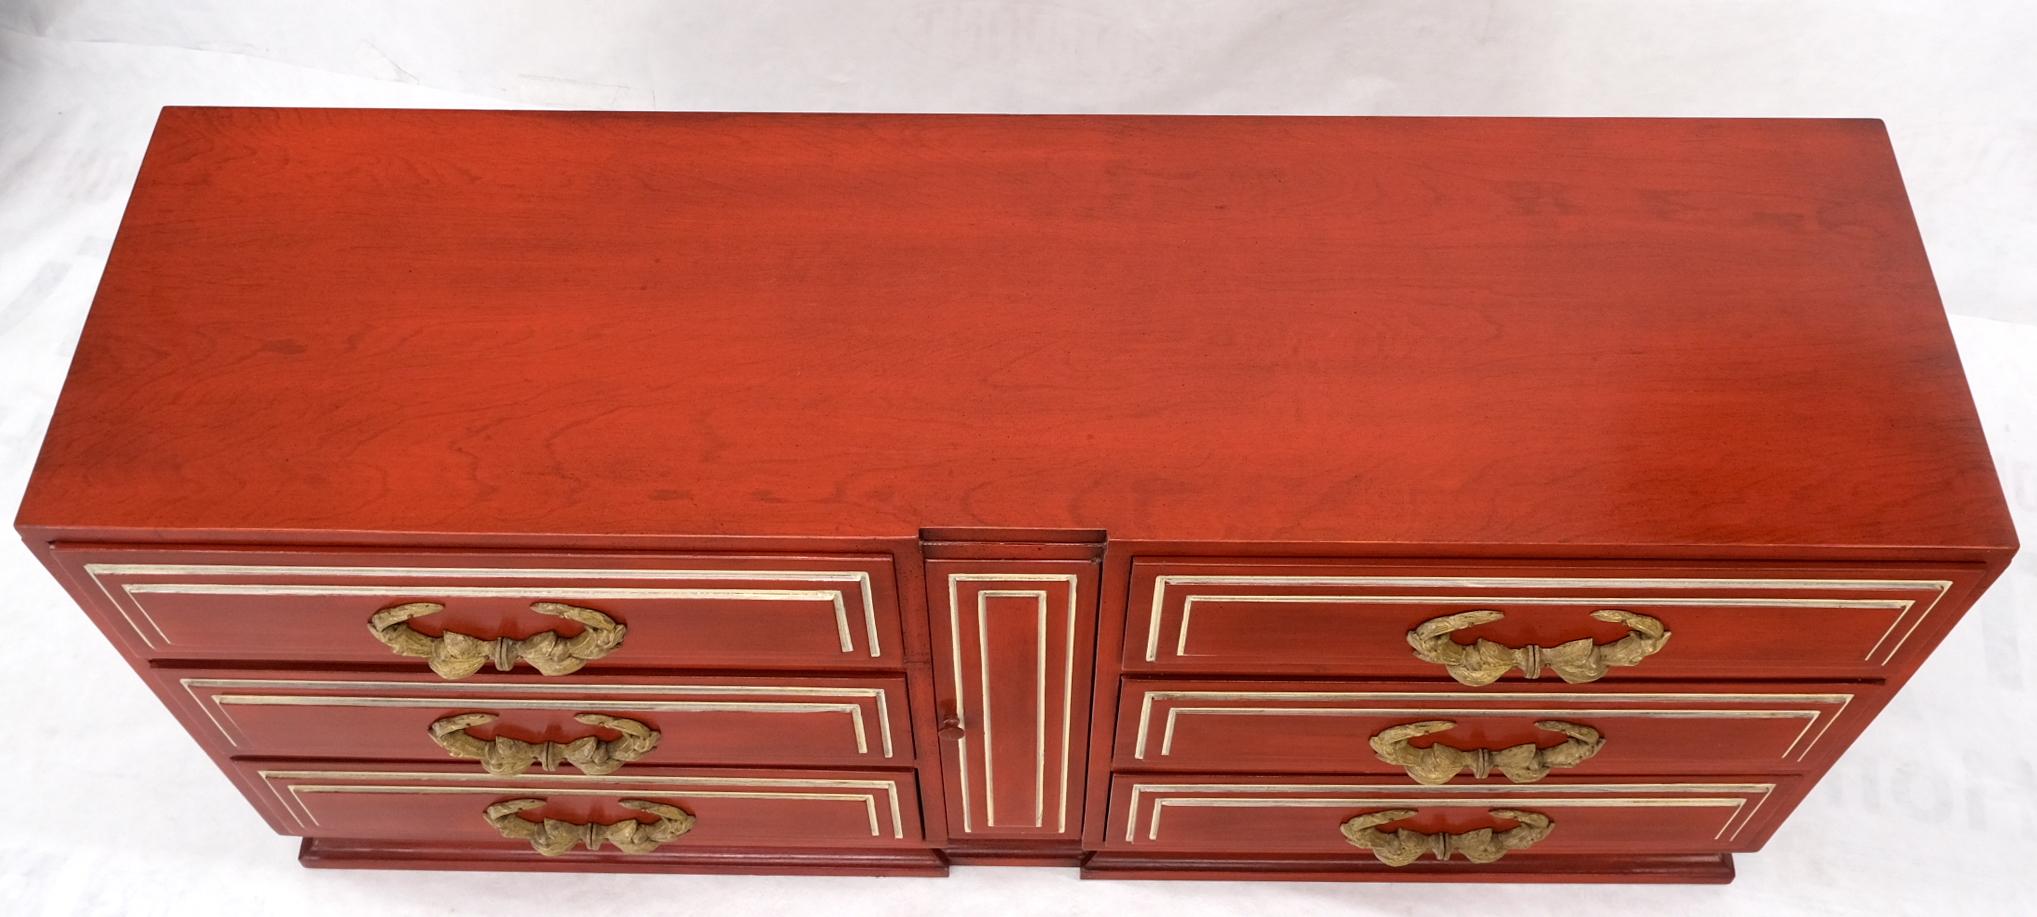 Painted Directoire Style Blood Tomato Red Lacquer Super Heavy Solid Brass Pulls Dresser For Sale